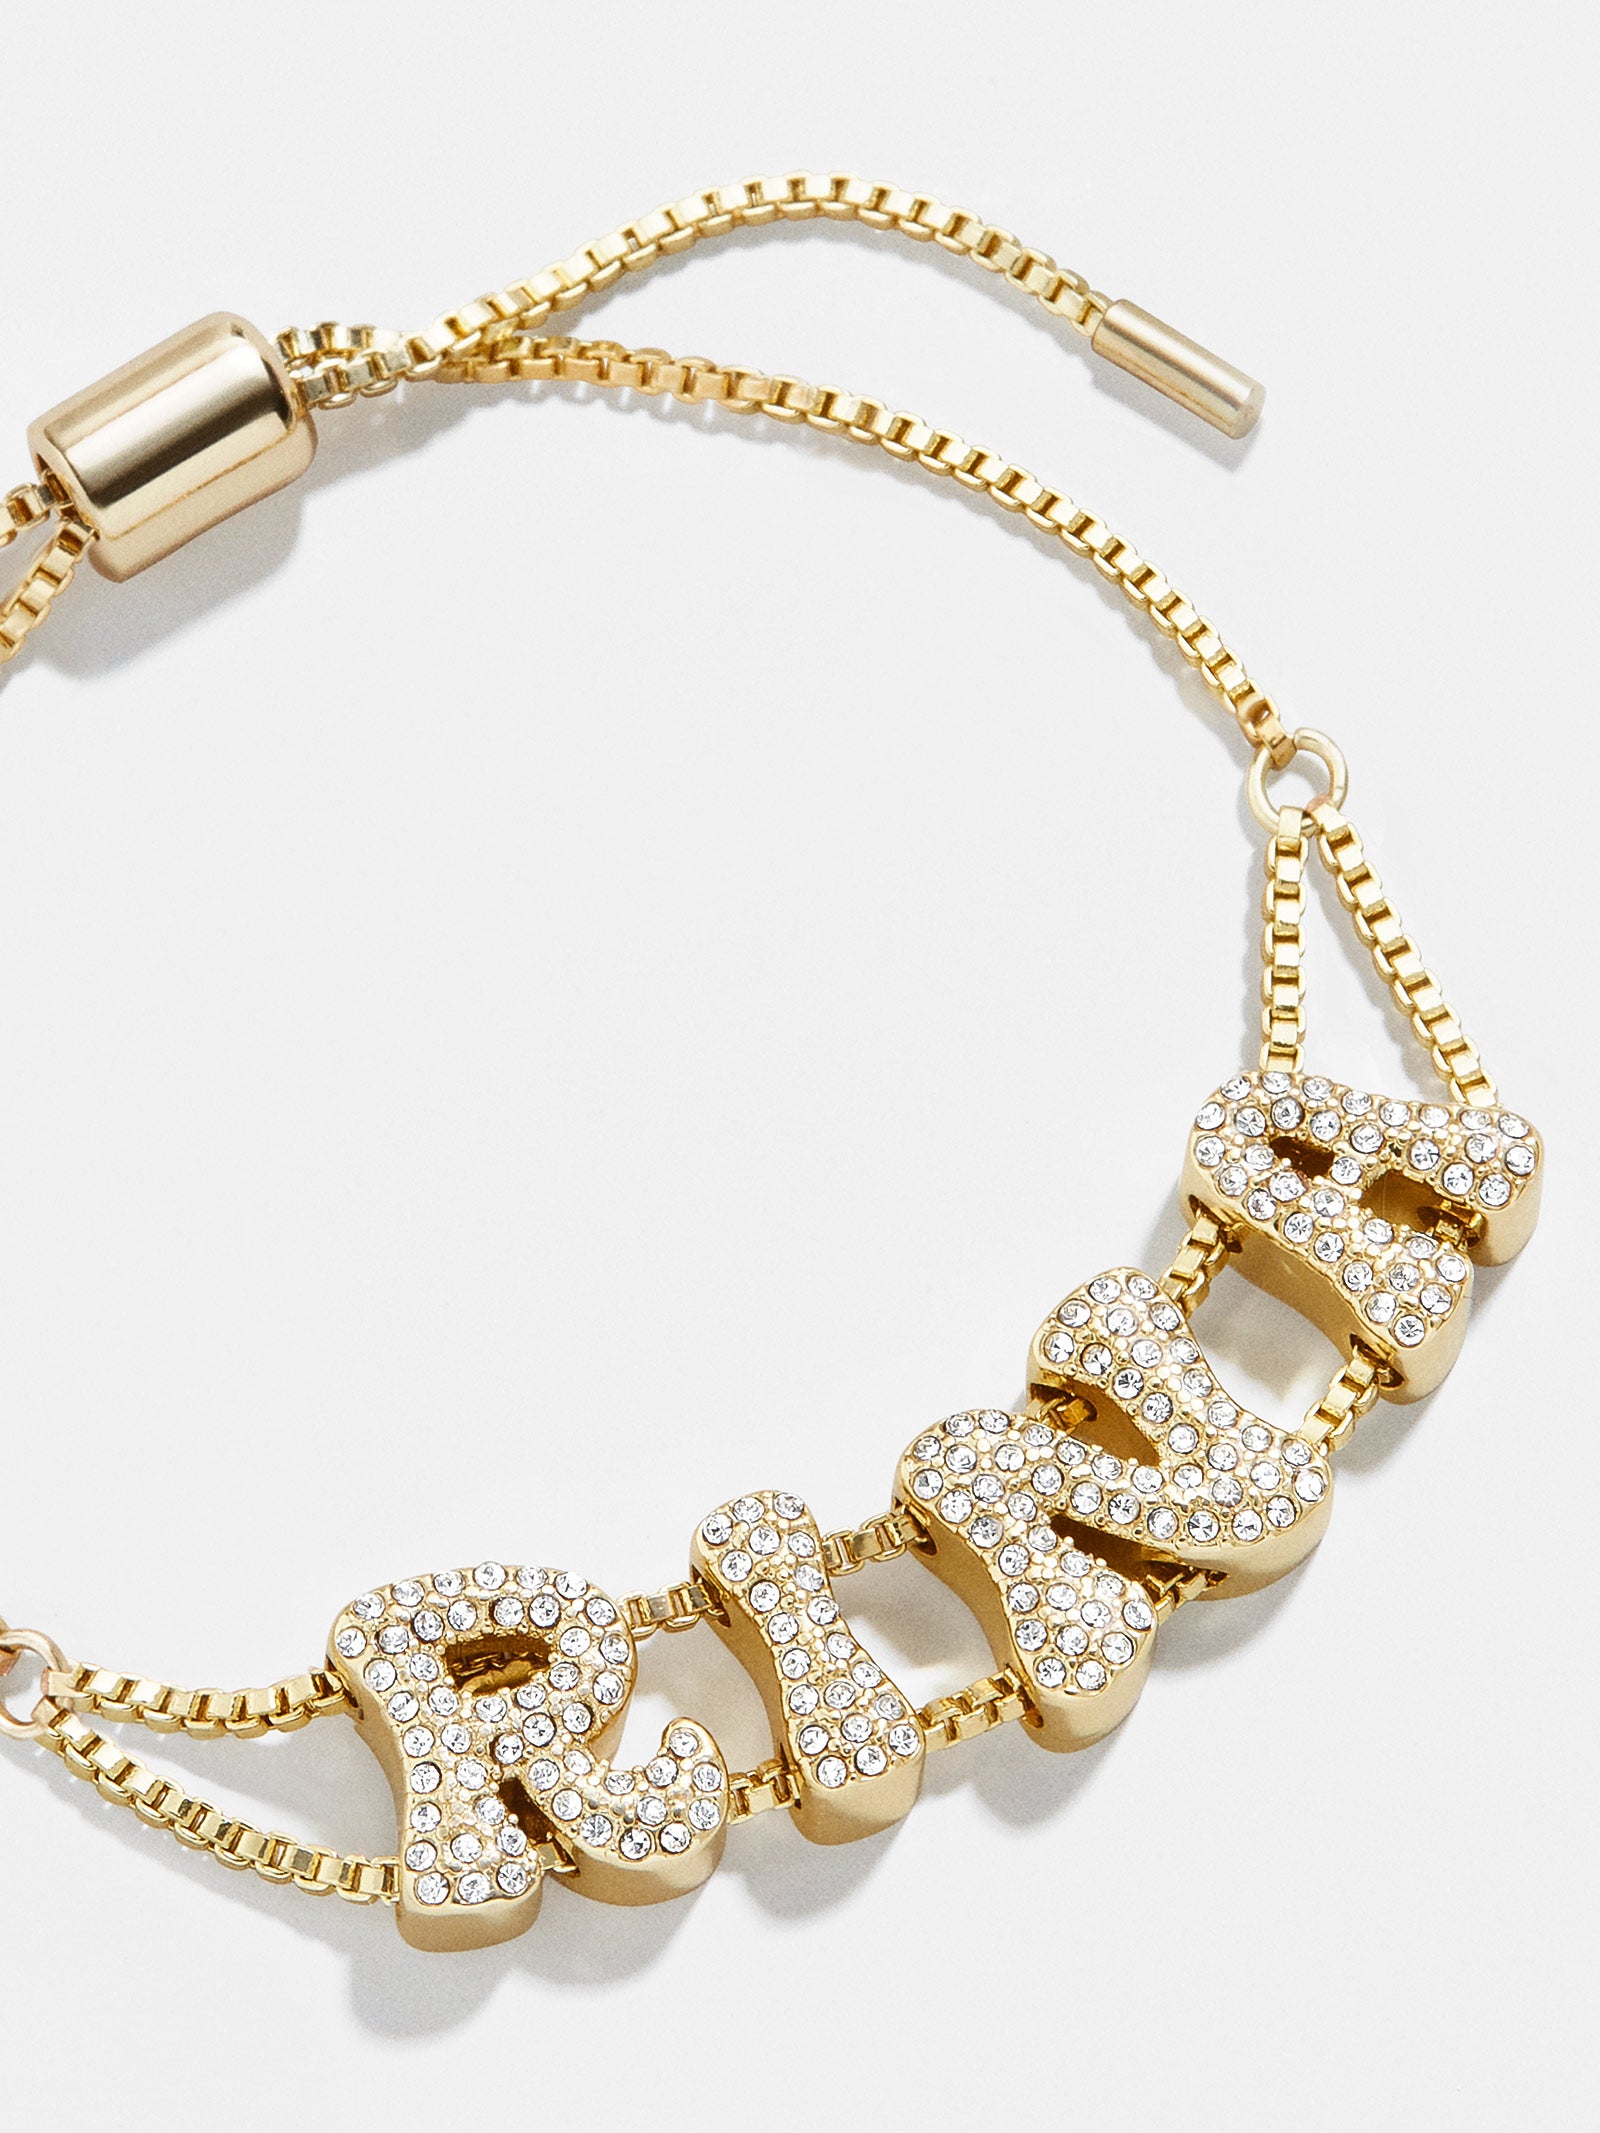 The Uppercase Bubble Letter Initial Bracelet - Letter : N - The M Jewelers